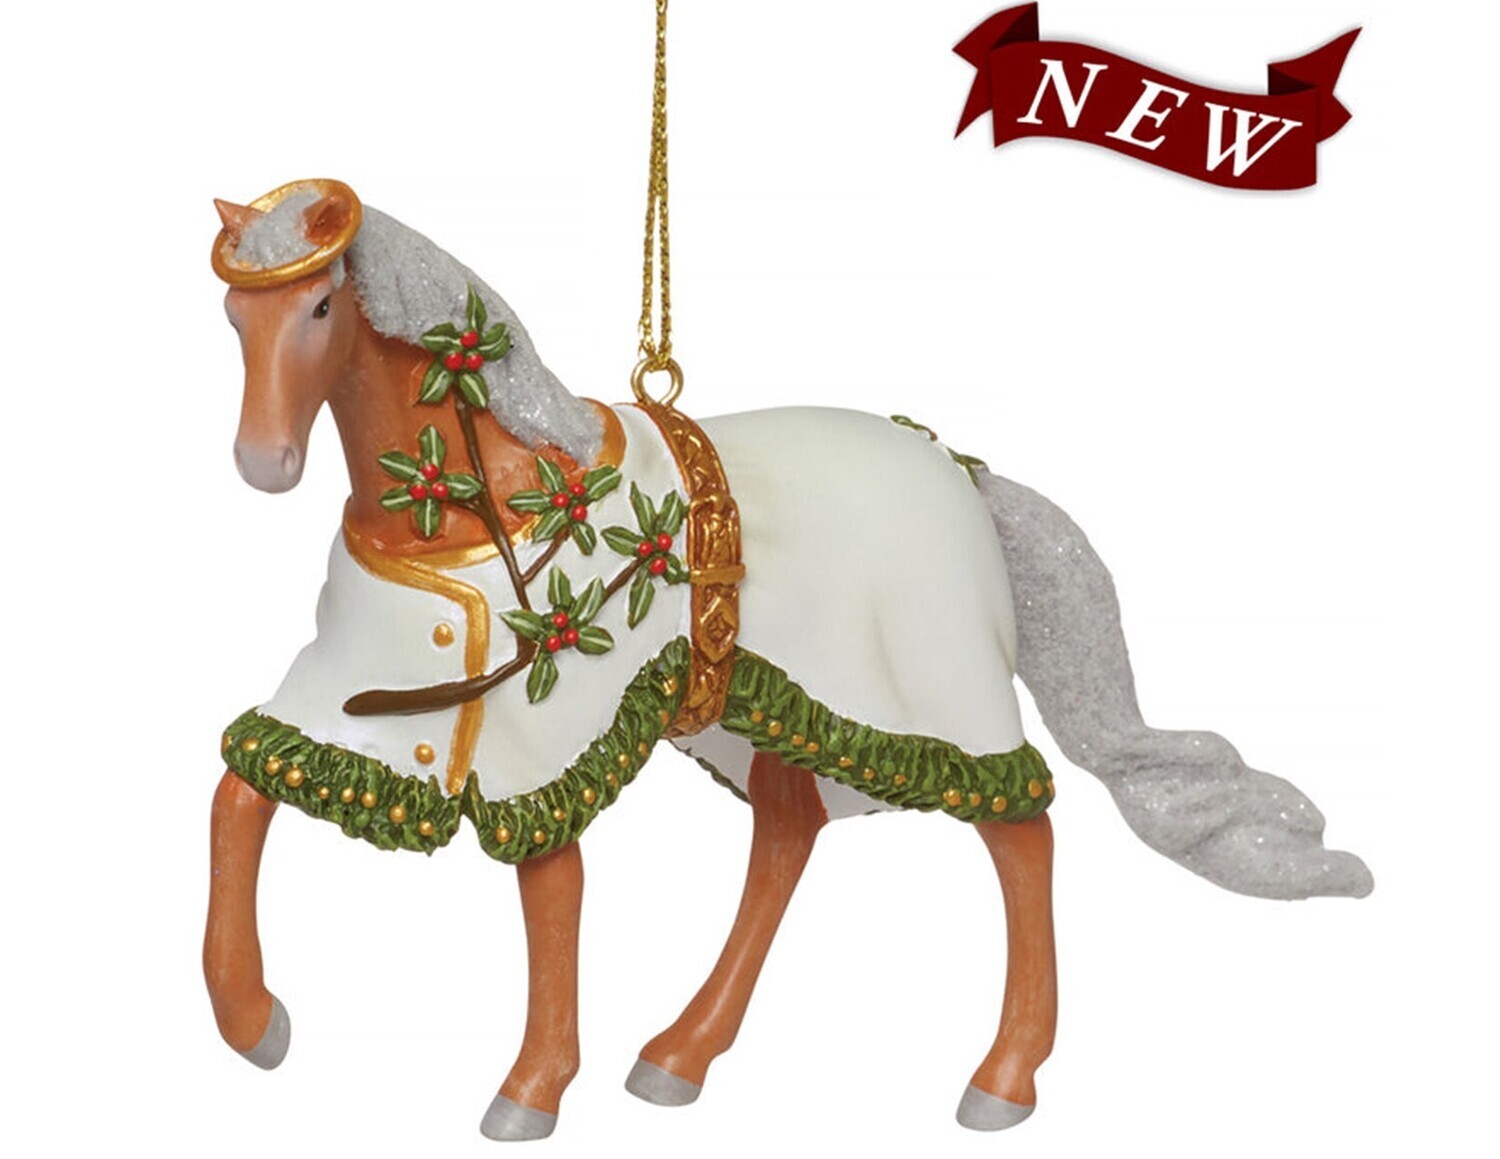 The Trail of Painted Ponies "Spirit of Christmas Past" Horse Figurine Ornament